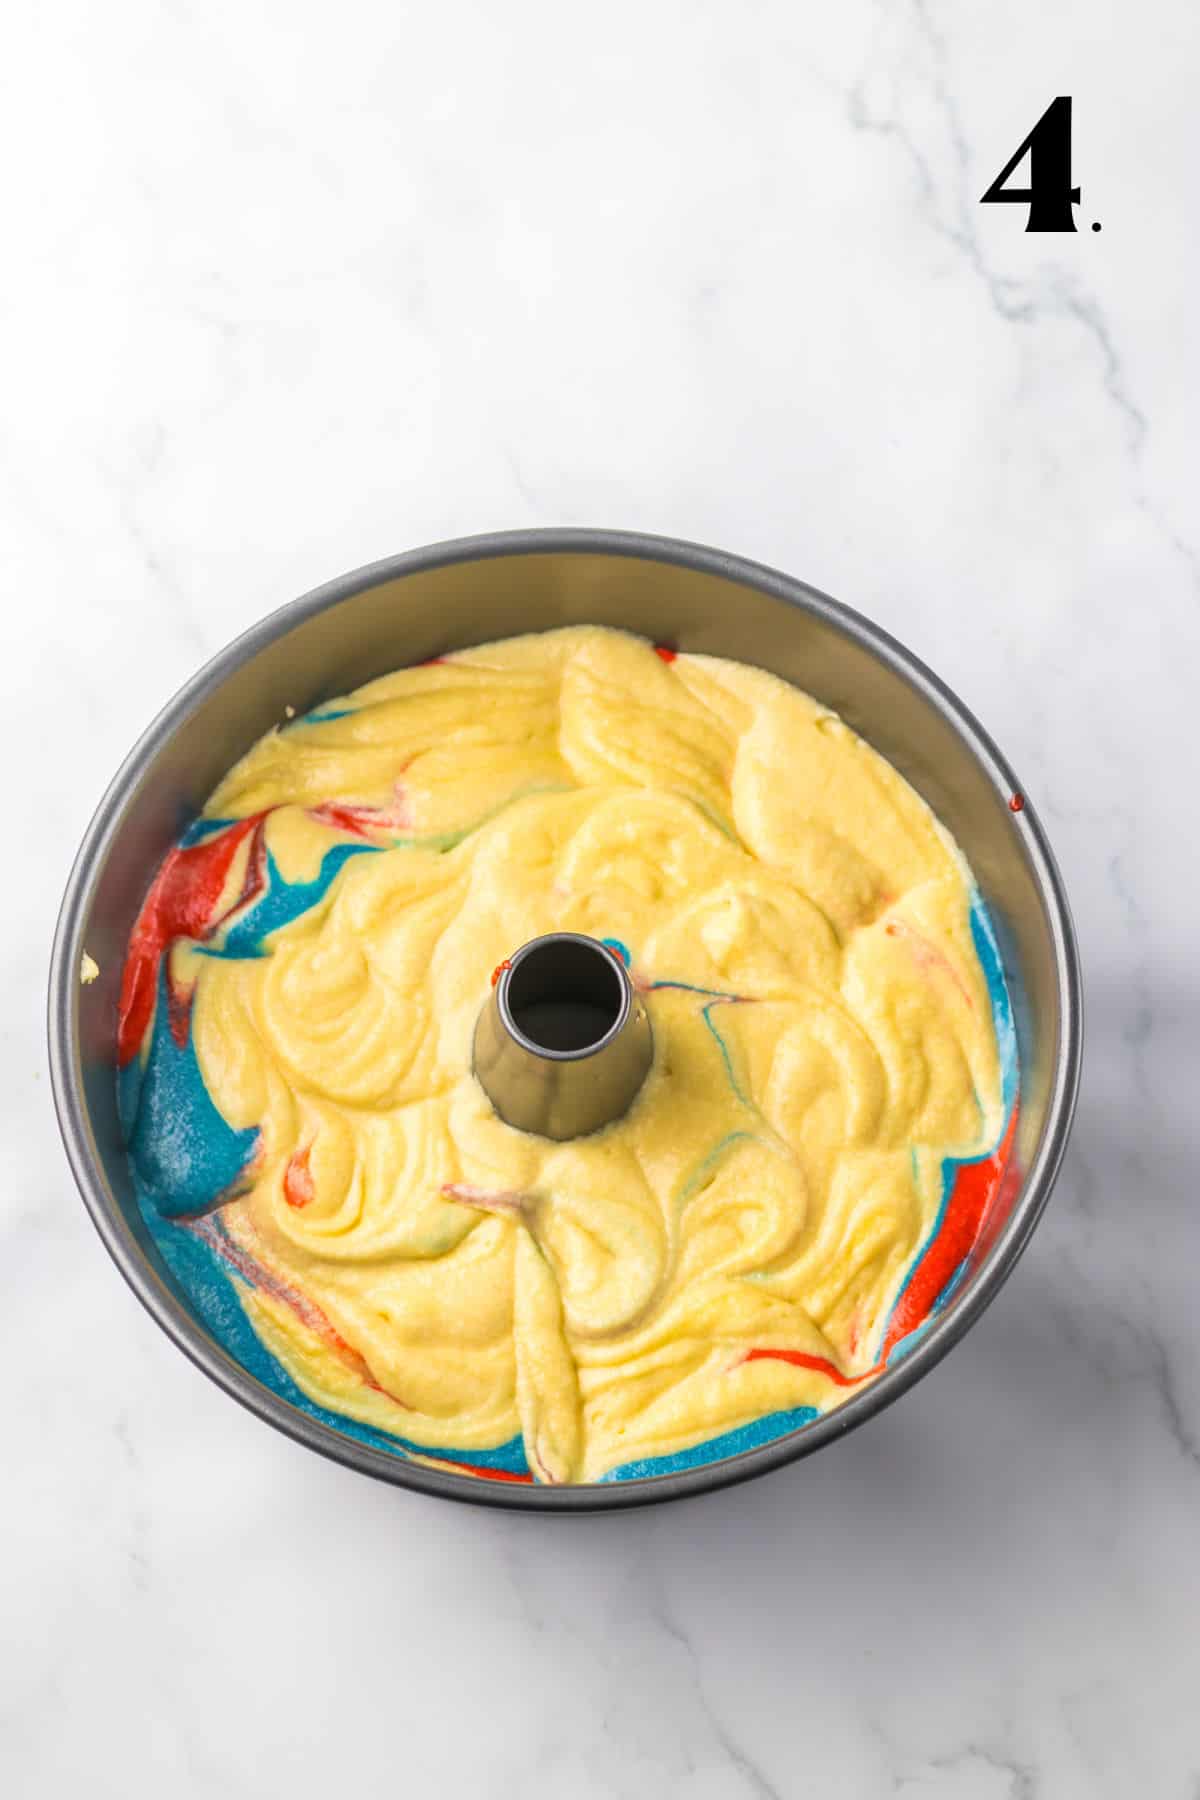 How to Make a 4th of July Bundt Cake - Step 4